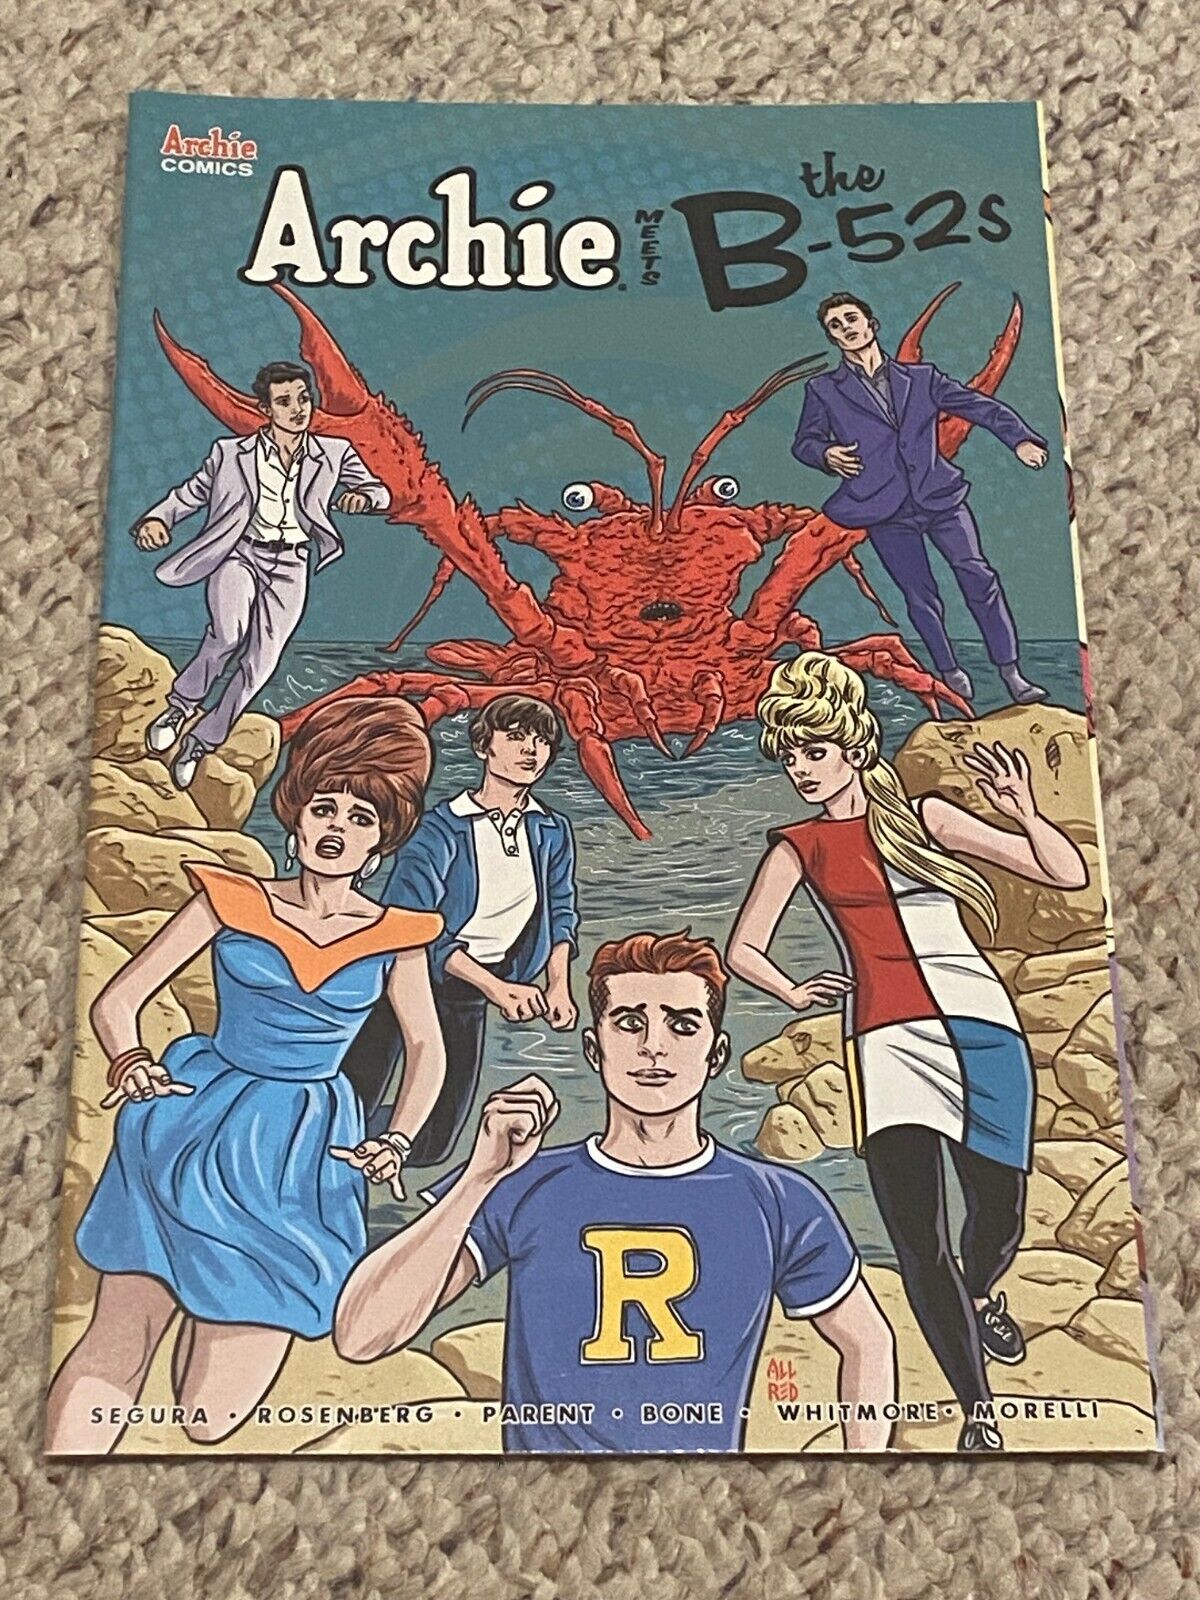 ARCHIE MEETS THE B-52s ONE SHOT VARIANT COVER BY MICHAEL ALLRED